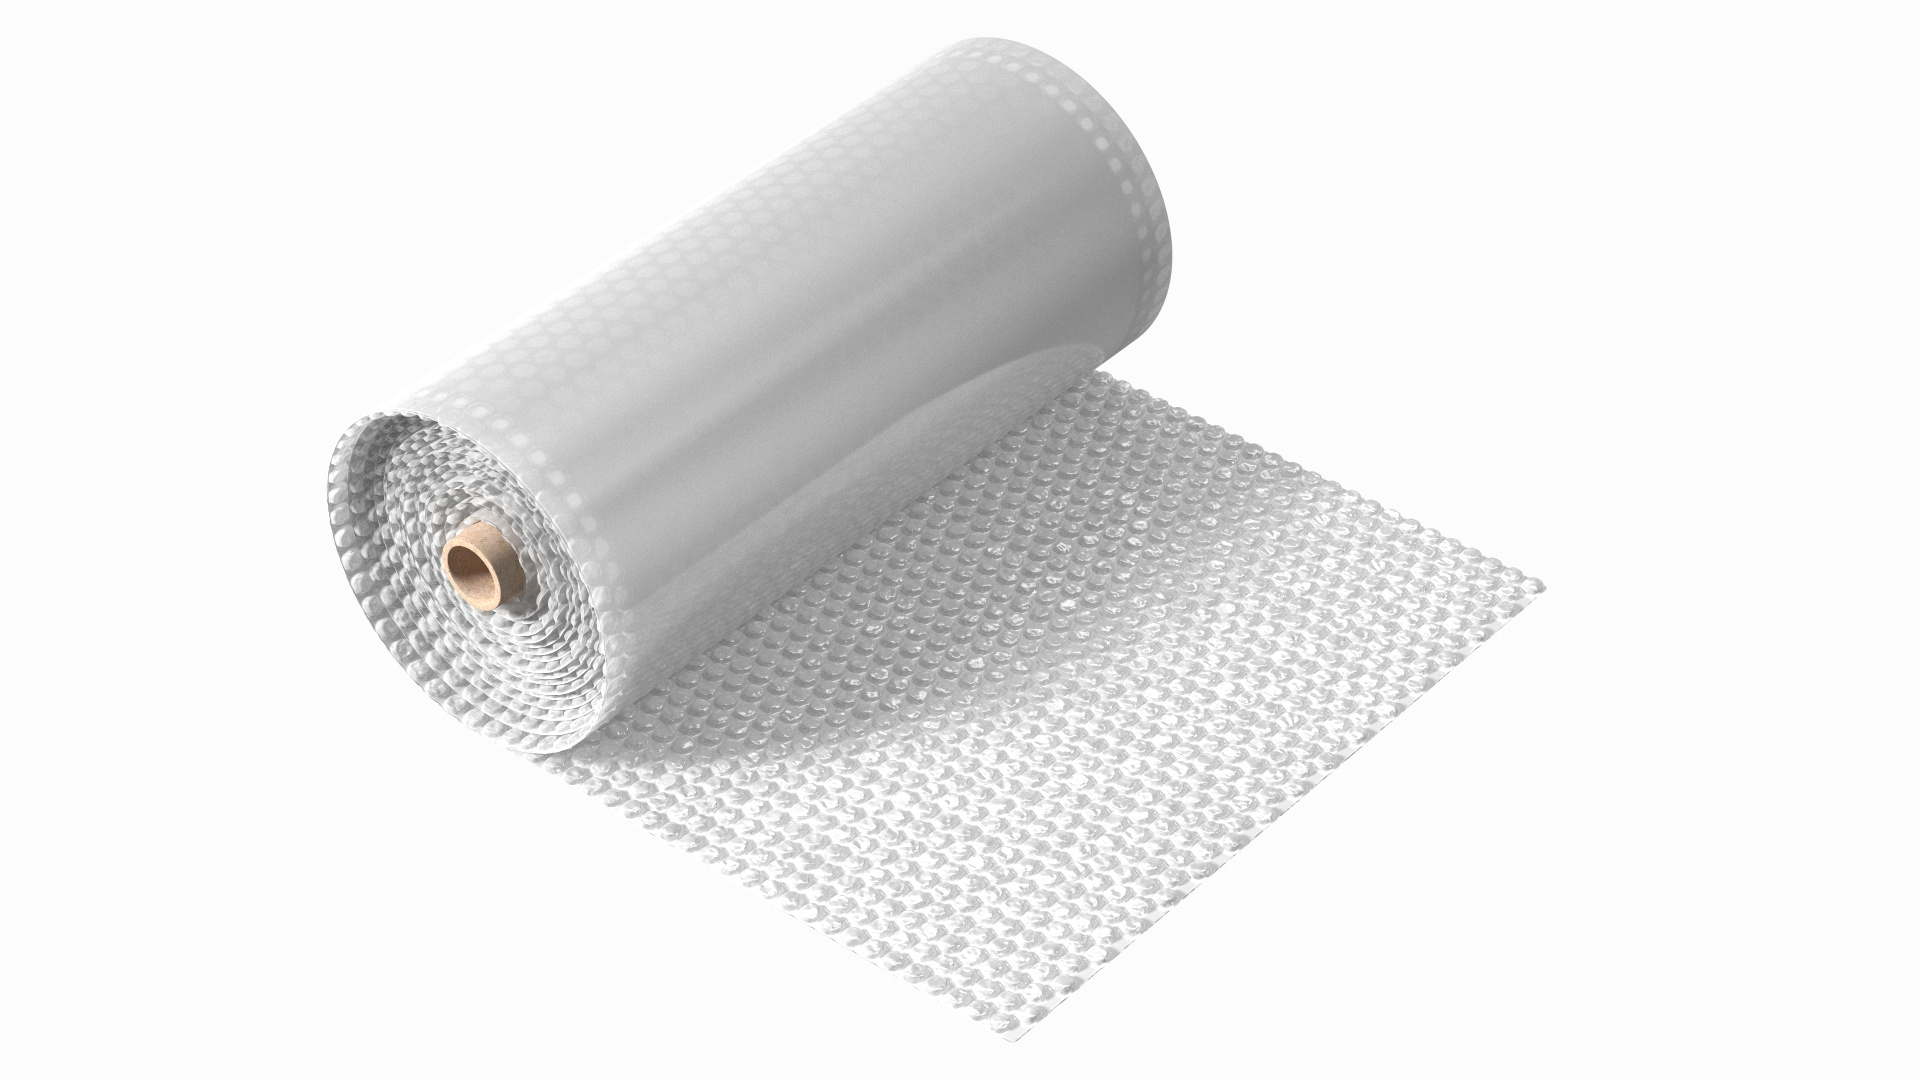 Large Bubble Wrap Backgrounds Stock Photo - Download Image Now